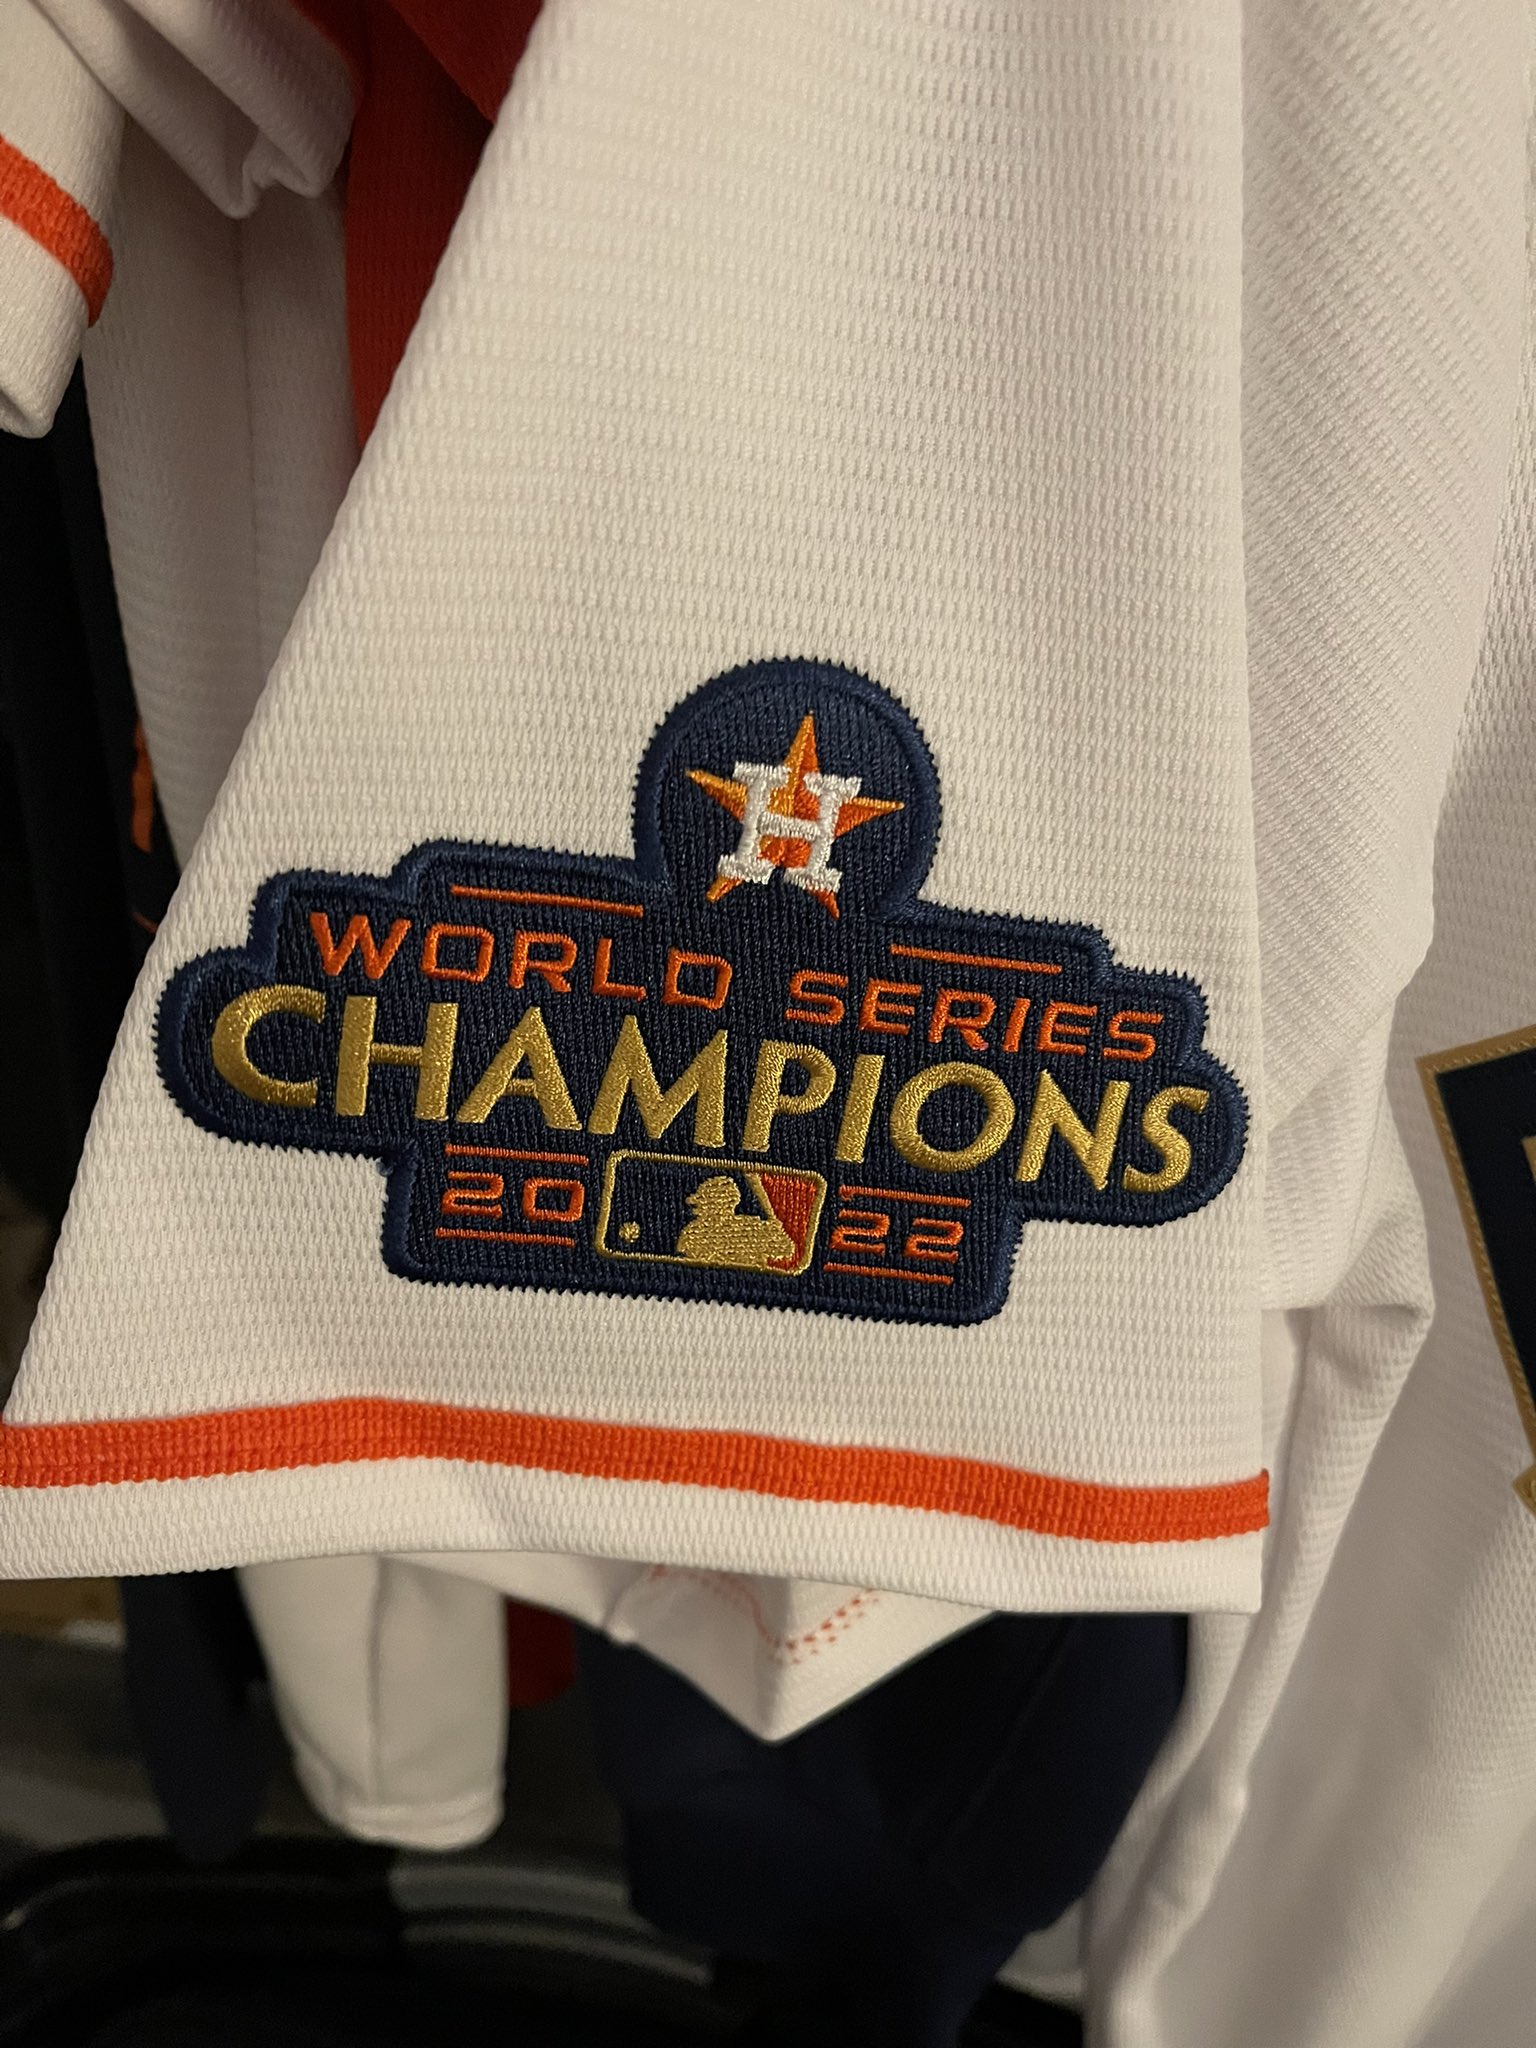 Houston Astros GOLD World Series 2022 Champions PATCH Champions Jersey Patch